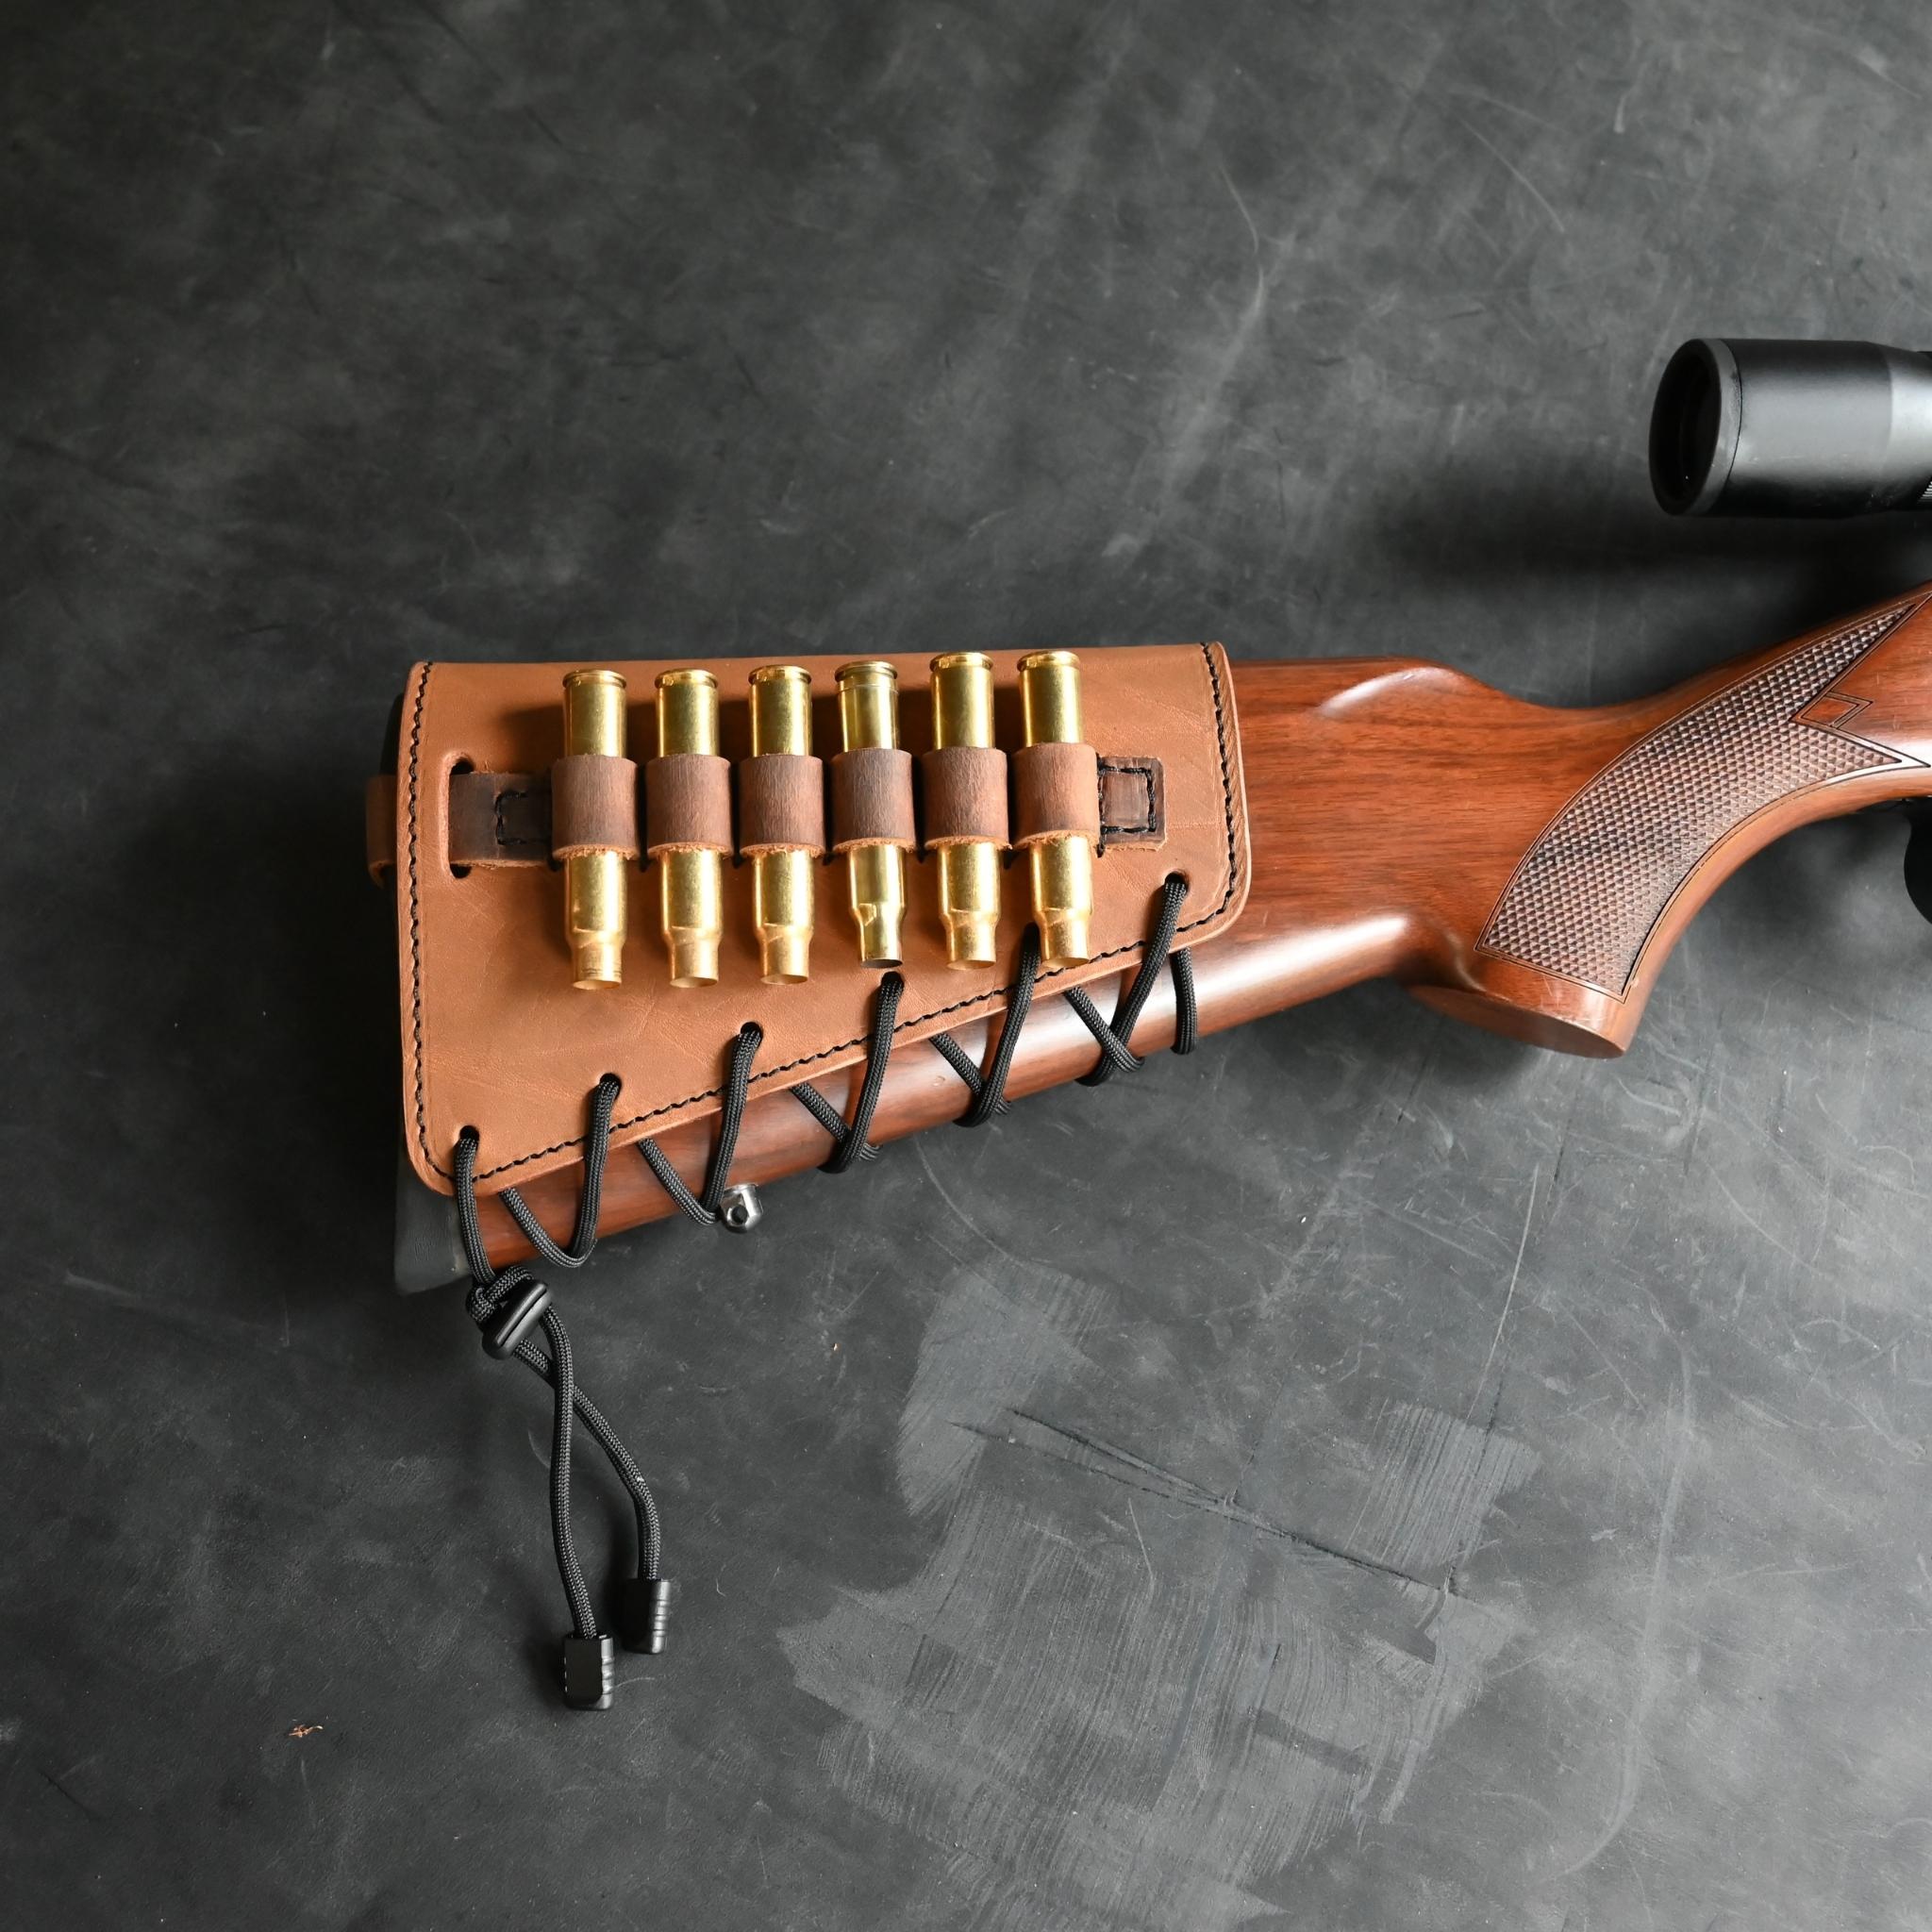 Leather Rifle Butt Stock Wrap